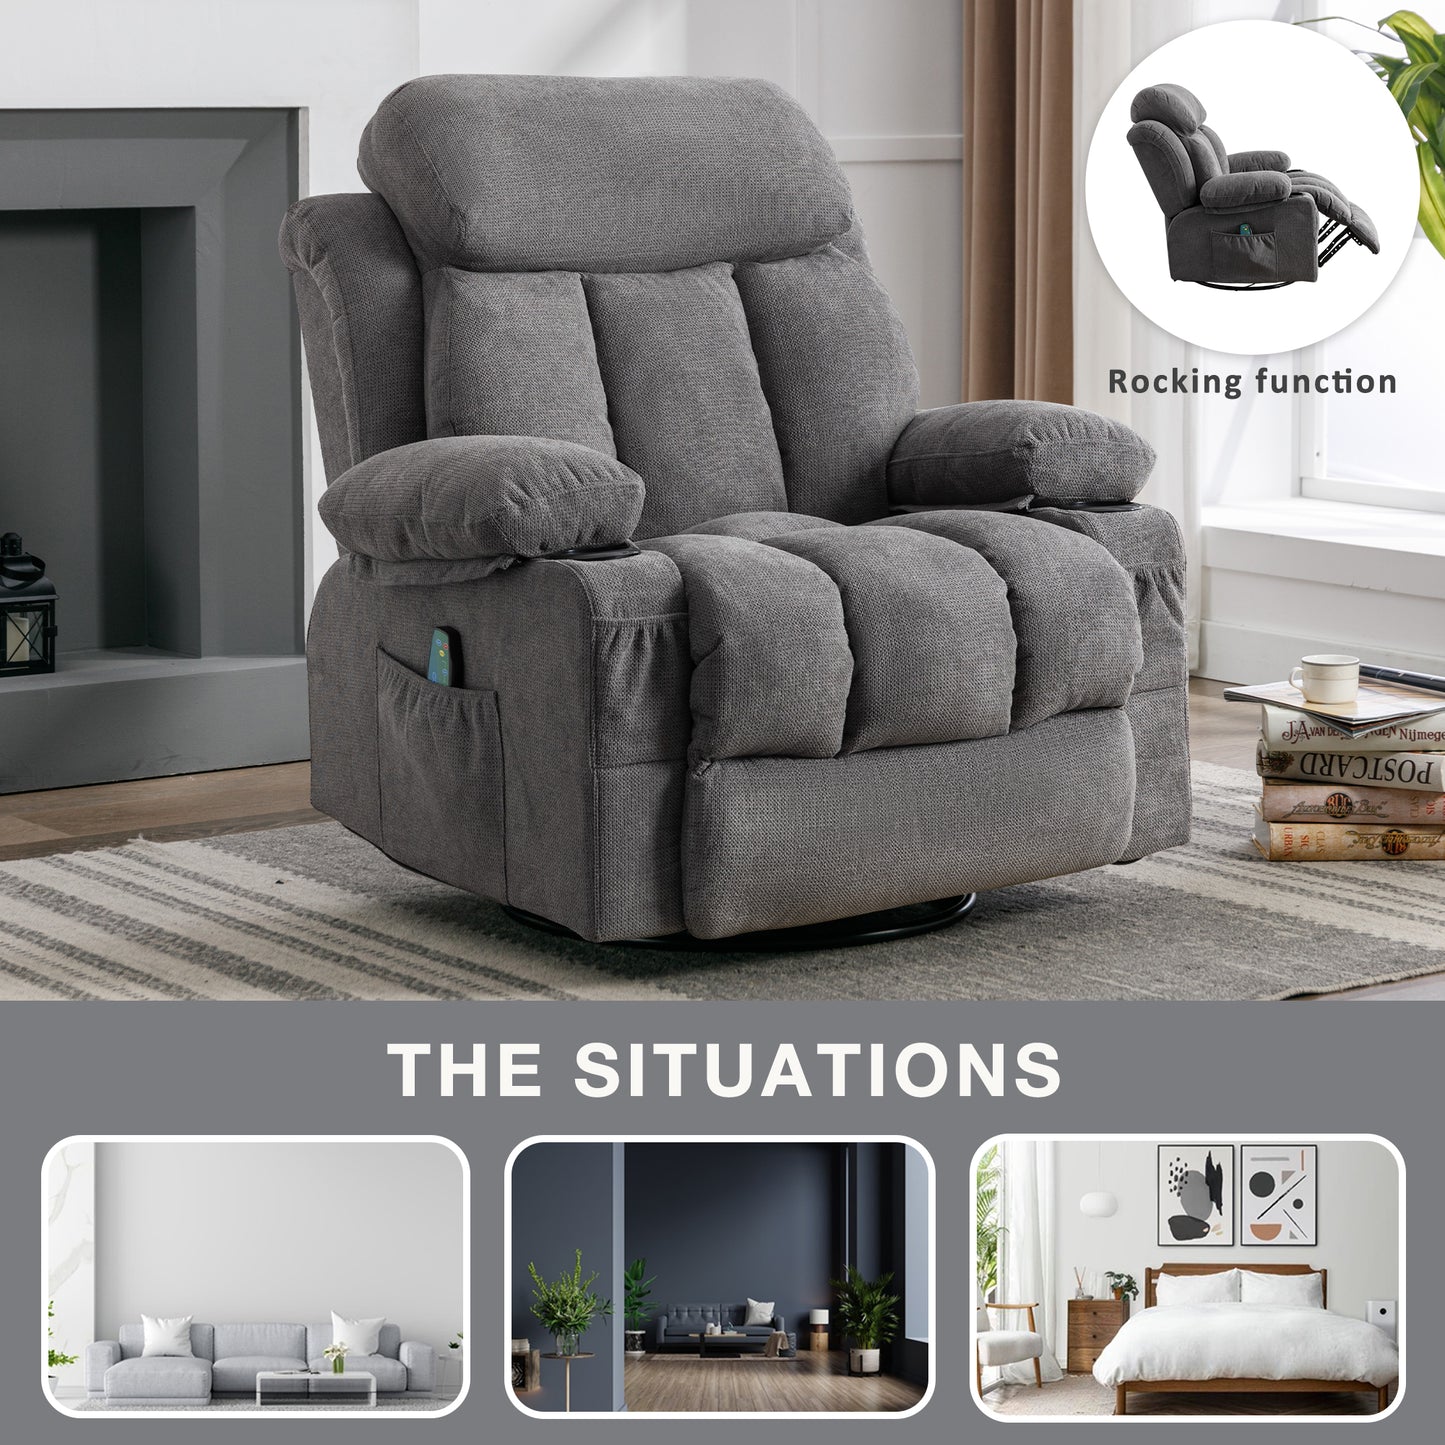 SYNGAR Recliner Chair for Elderly, Massage Chair with USB, Cup Holders and Side Pockets, Living Room Single Sofa Seat Nursery Swivel Rocker Sofa Lounge Chair, Heavy Duty Reclining Mechanism, Gray